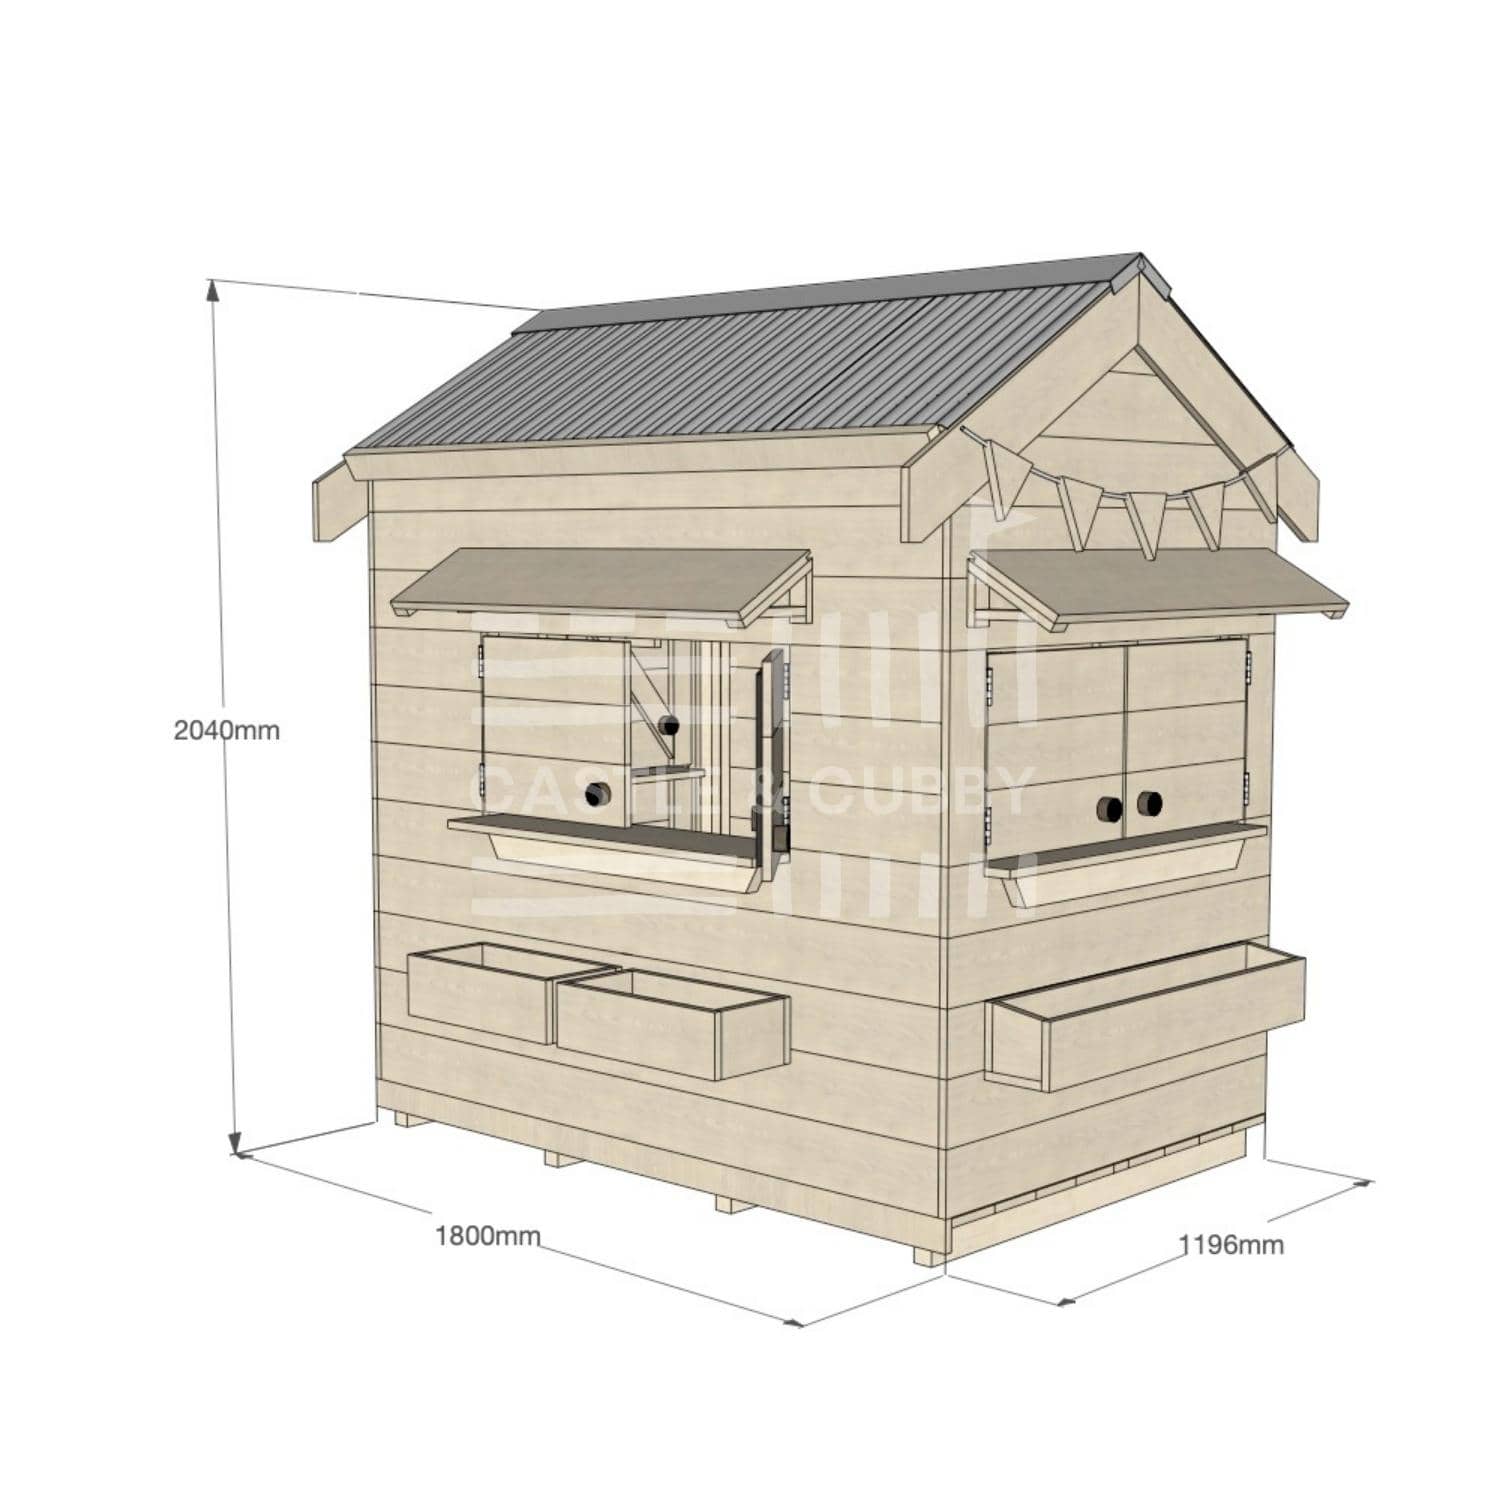 Pitched roof raw wooden cubby house residential and family homes little rectangle dimensions